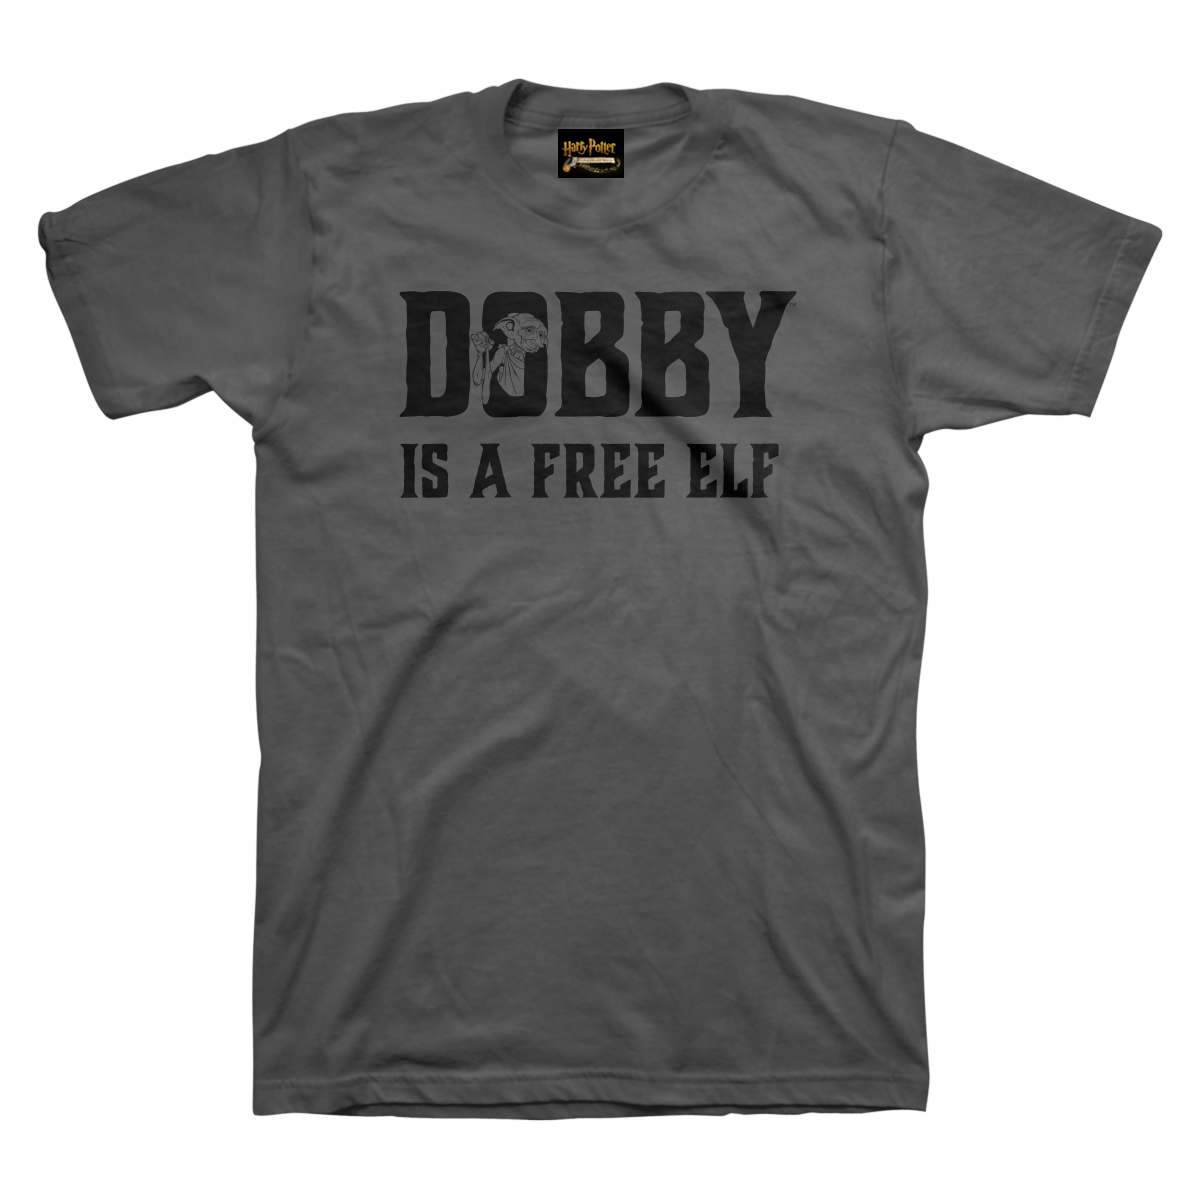 "Dobby is a free elf" t-shirt (from Harry Potter and the Chamber of Secrets™ in Concert)